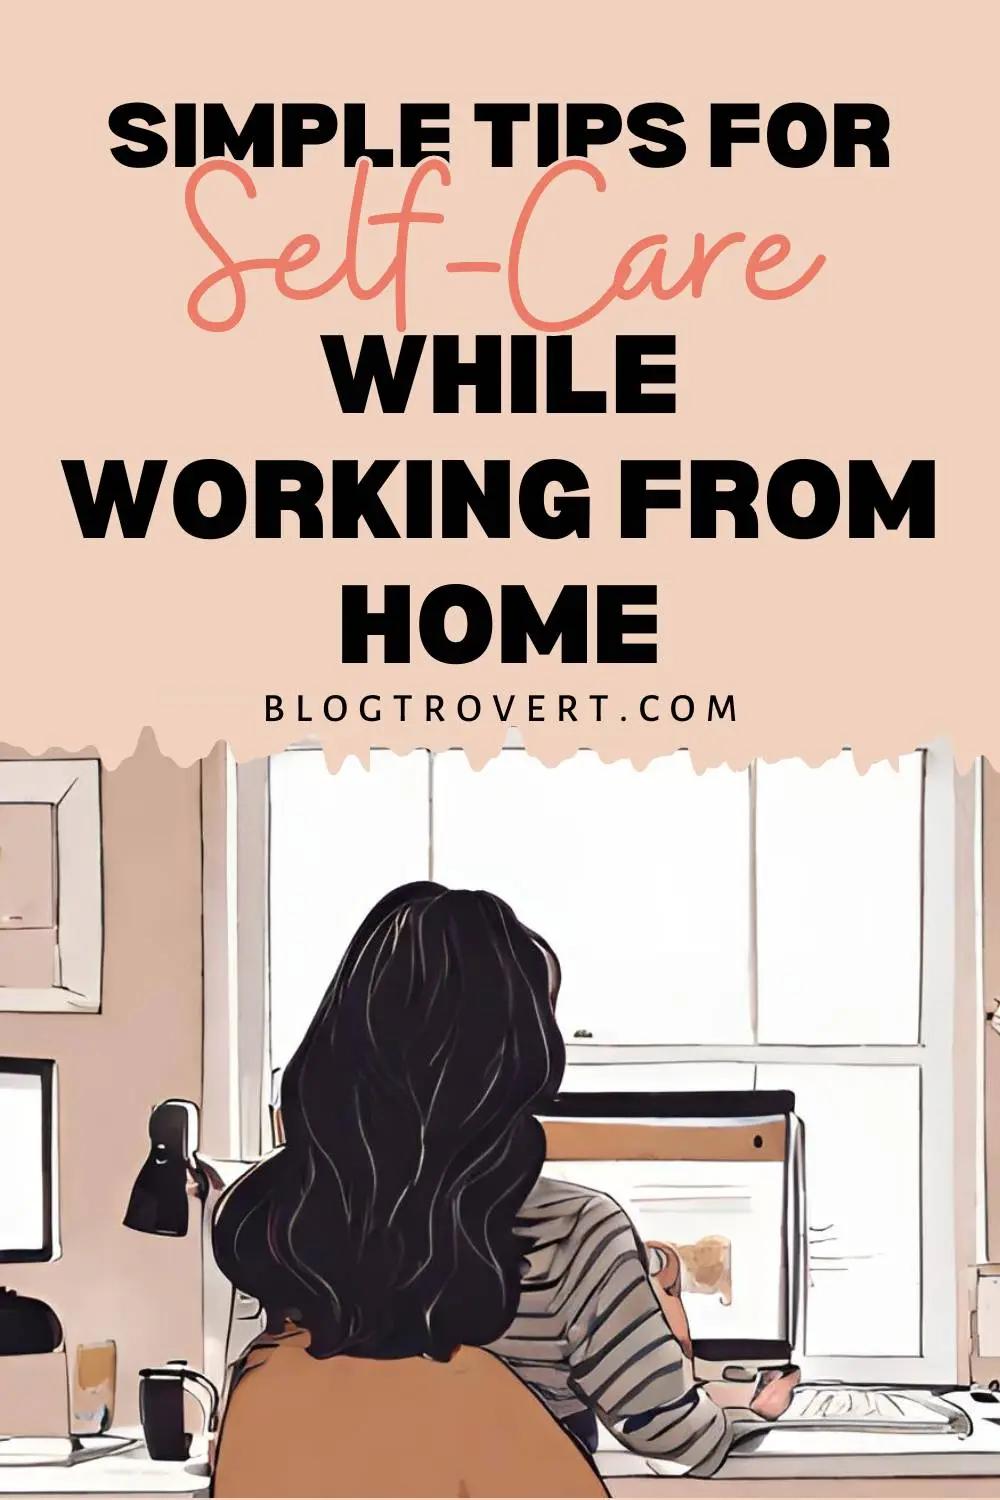 self-care while working from home